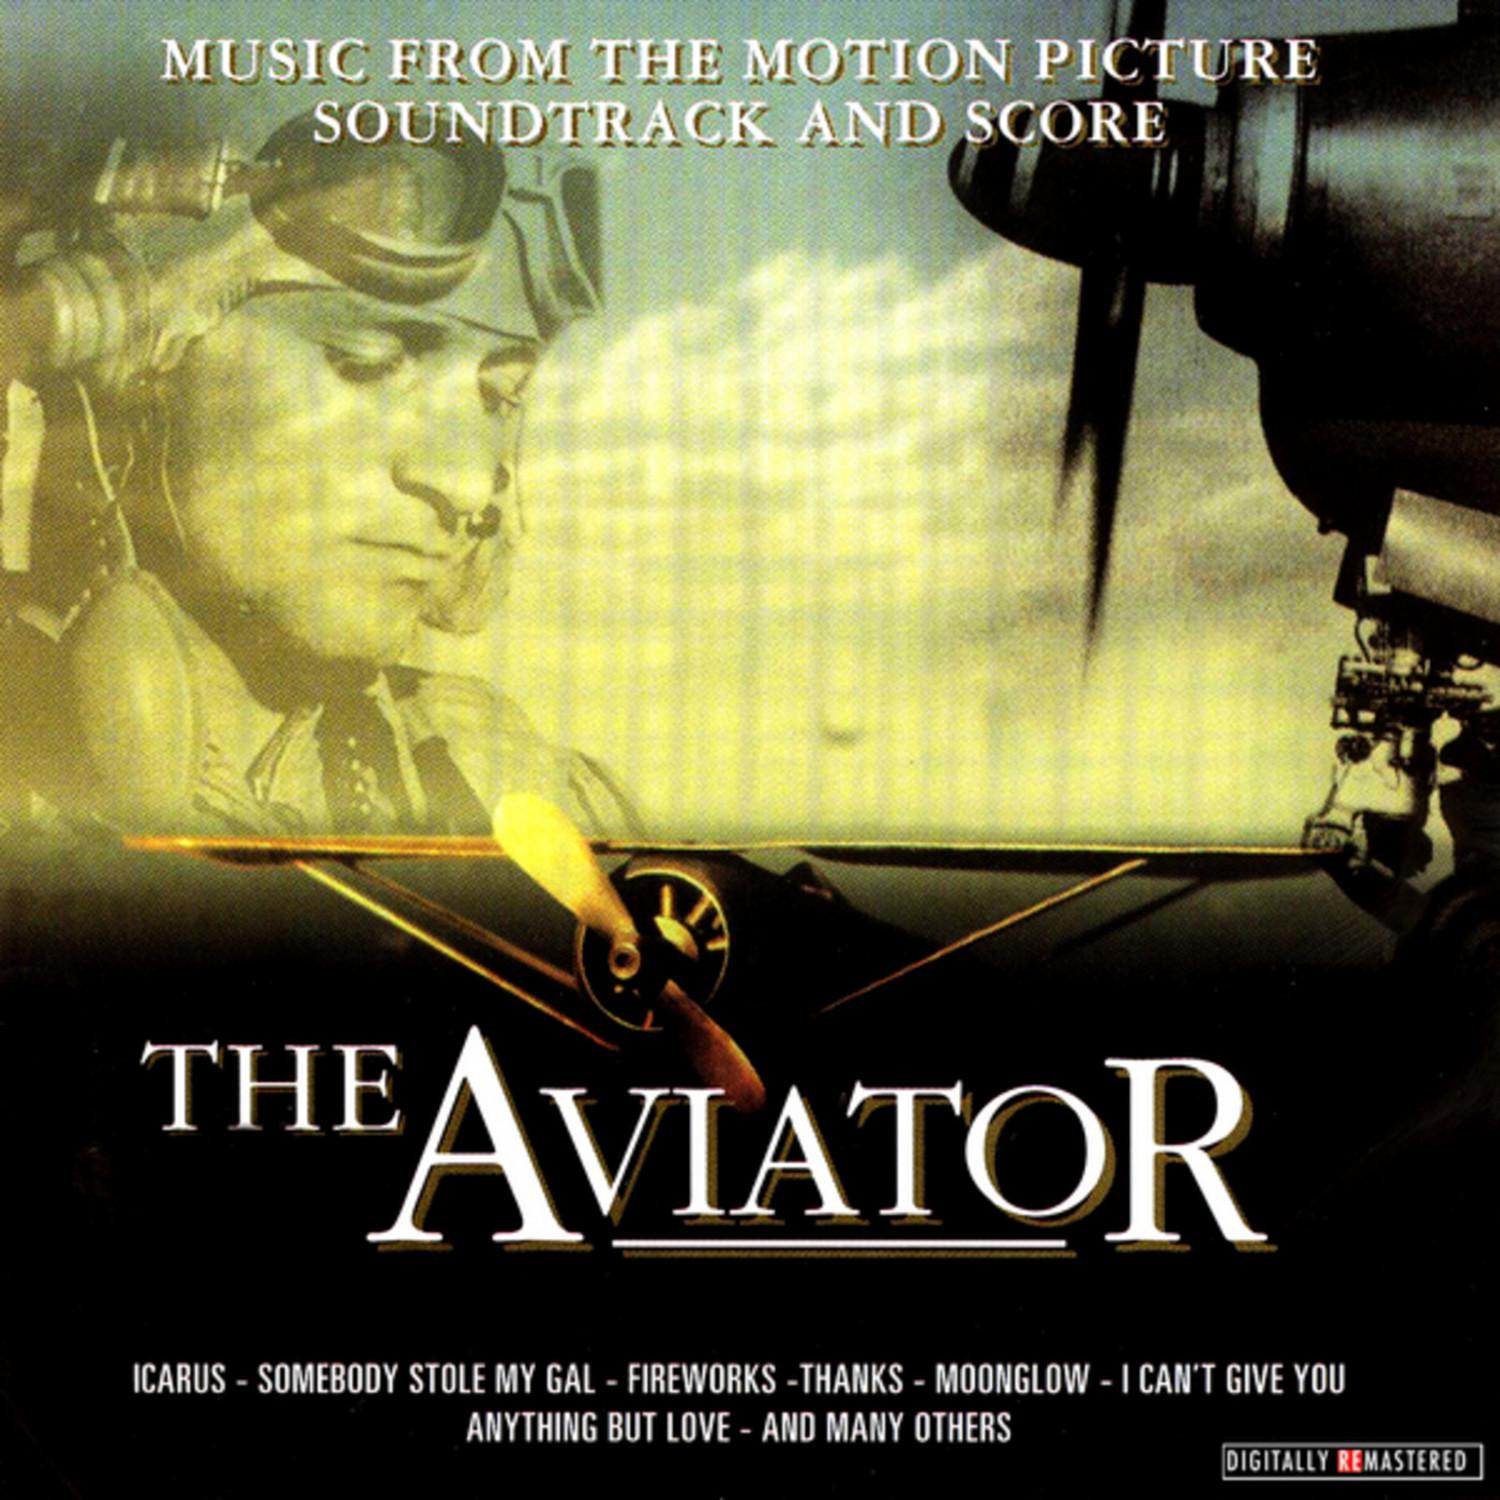 Music from The Aviator